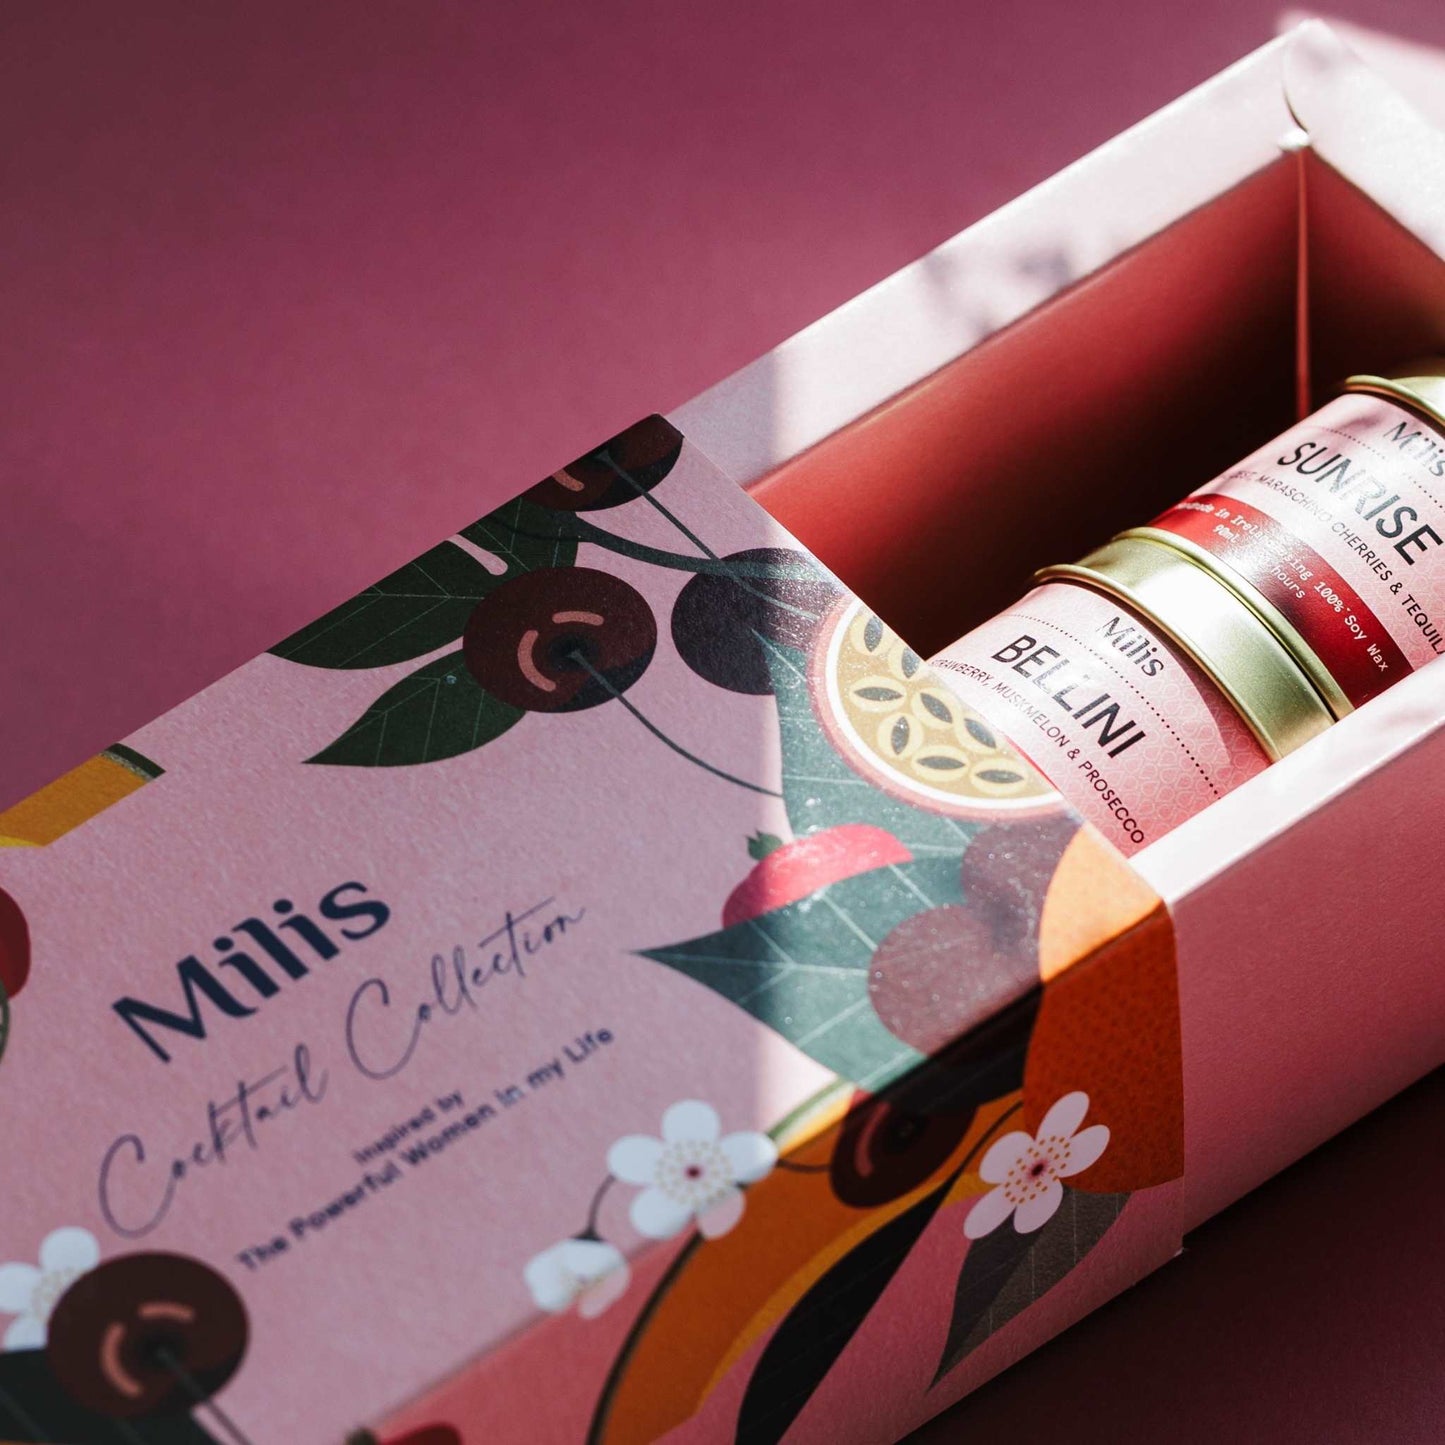 Milis Candles Milis Cocktail Collection - Trio of 20-Hour Candles in Gift Box